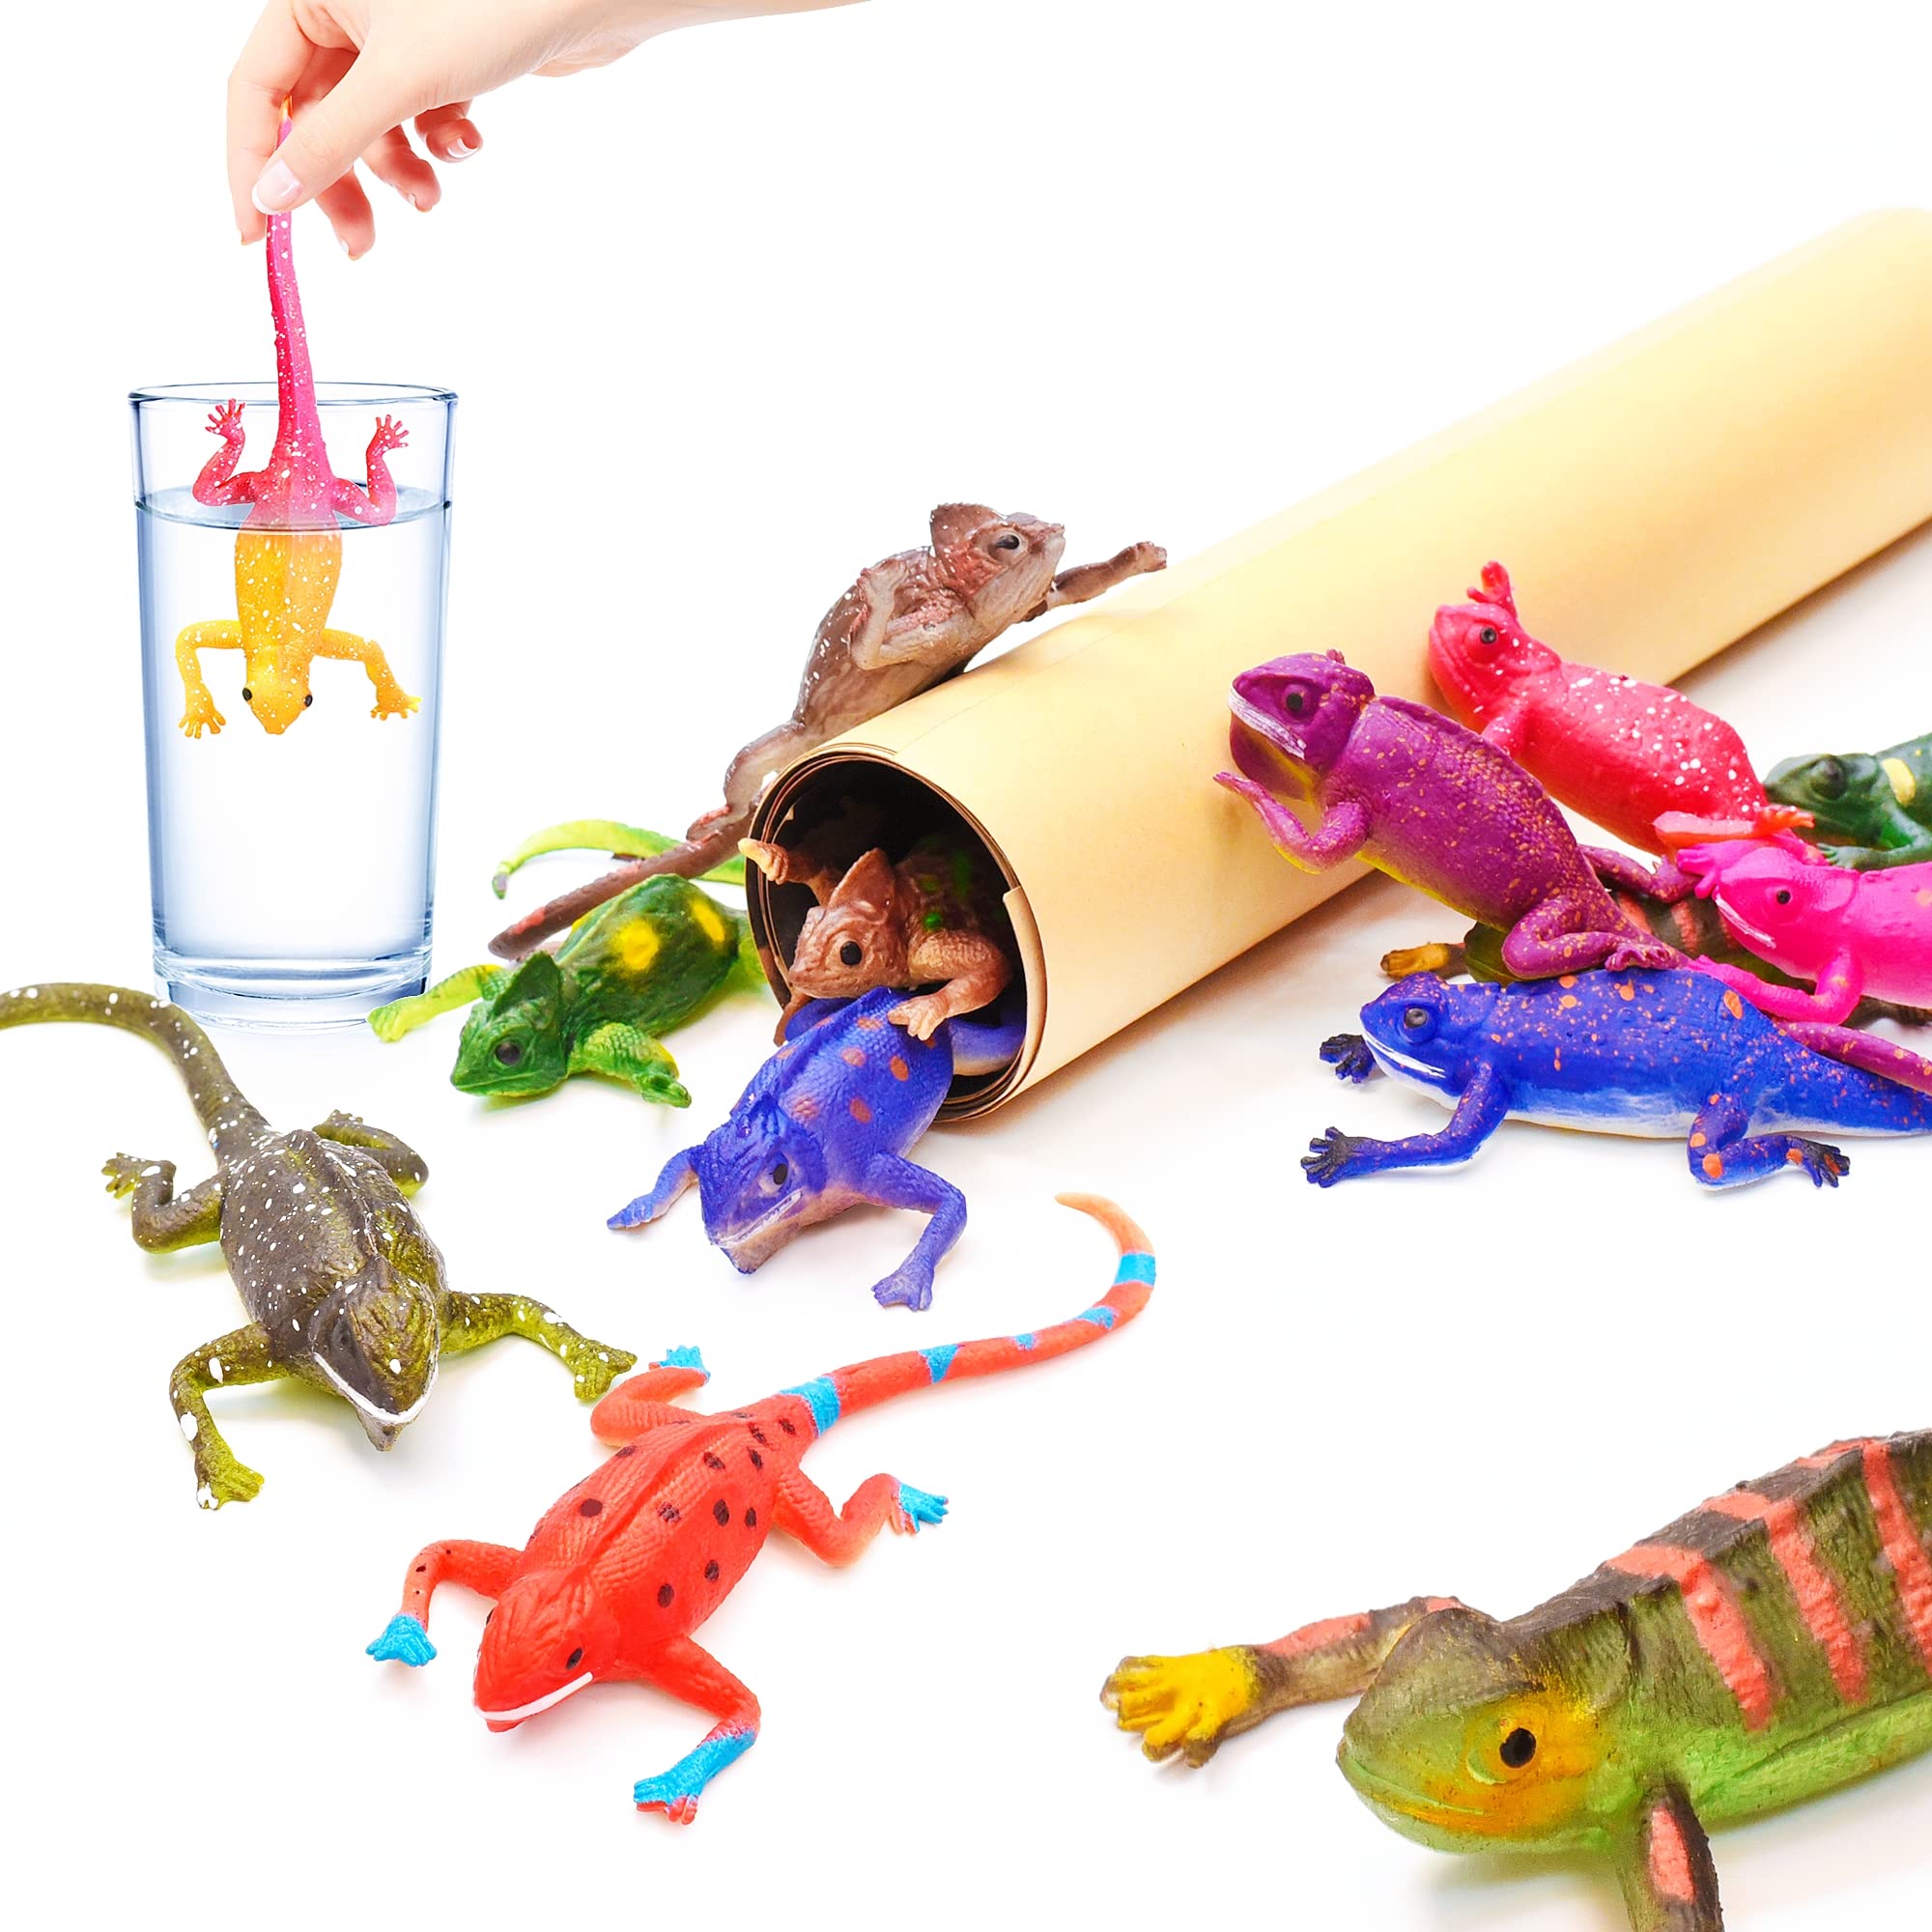 YiliUsAnwU 10 PCS Lizard Water Toys,Color Changing Chameleon Toys,Stretchy Animal Toys,for 3 Years and up,for Goodie Bag Fillers,Classroom Rewards,Kids Easter Basket